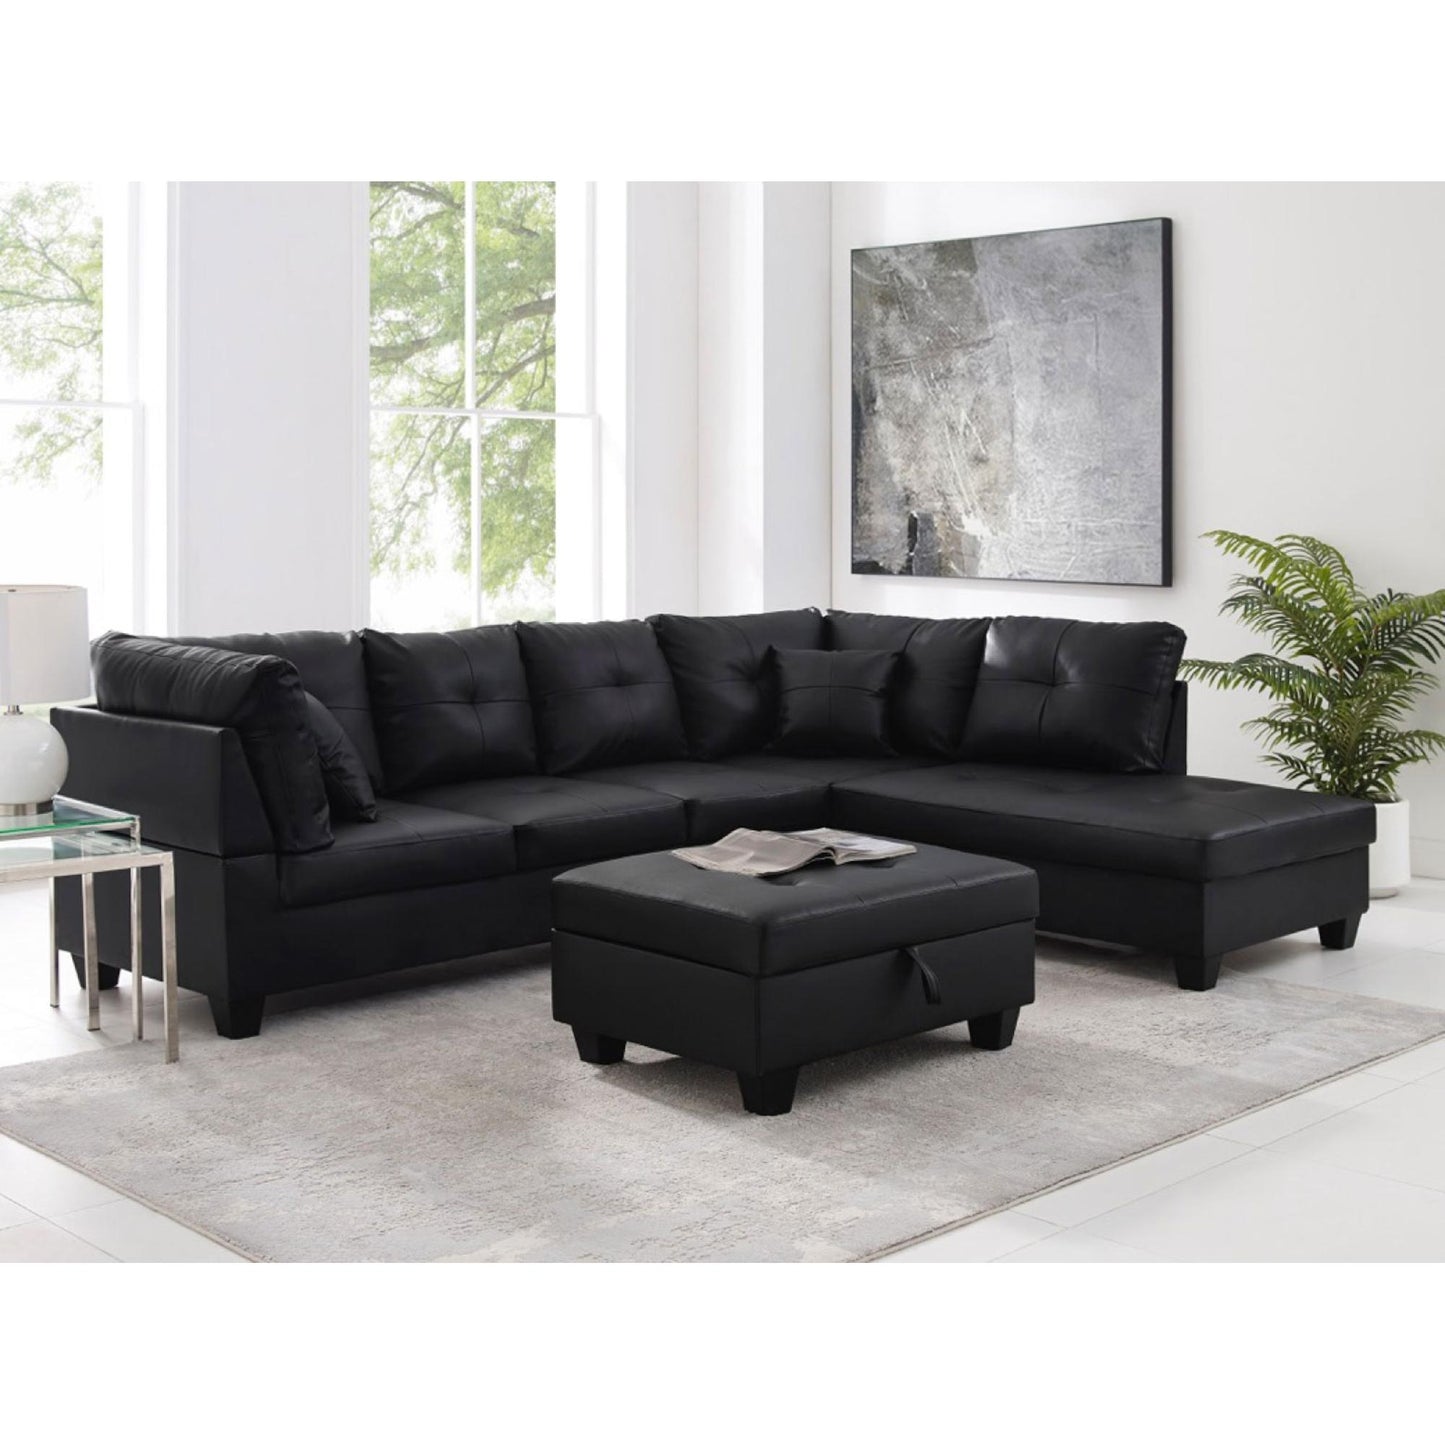 Spencer Sectional with Storage Ottoman in Black PU